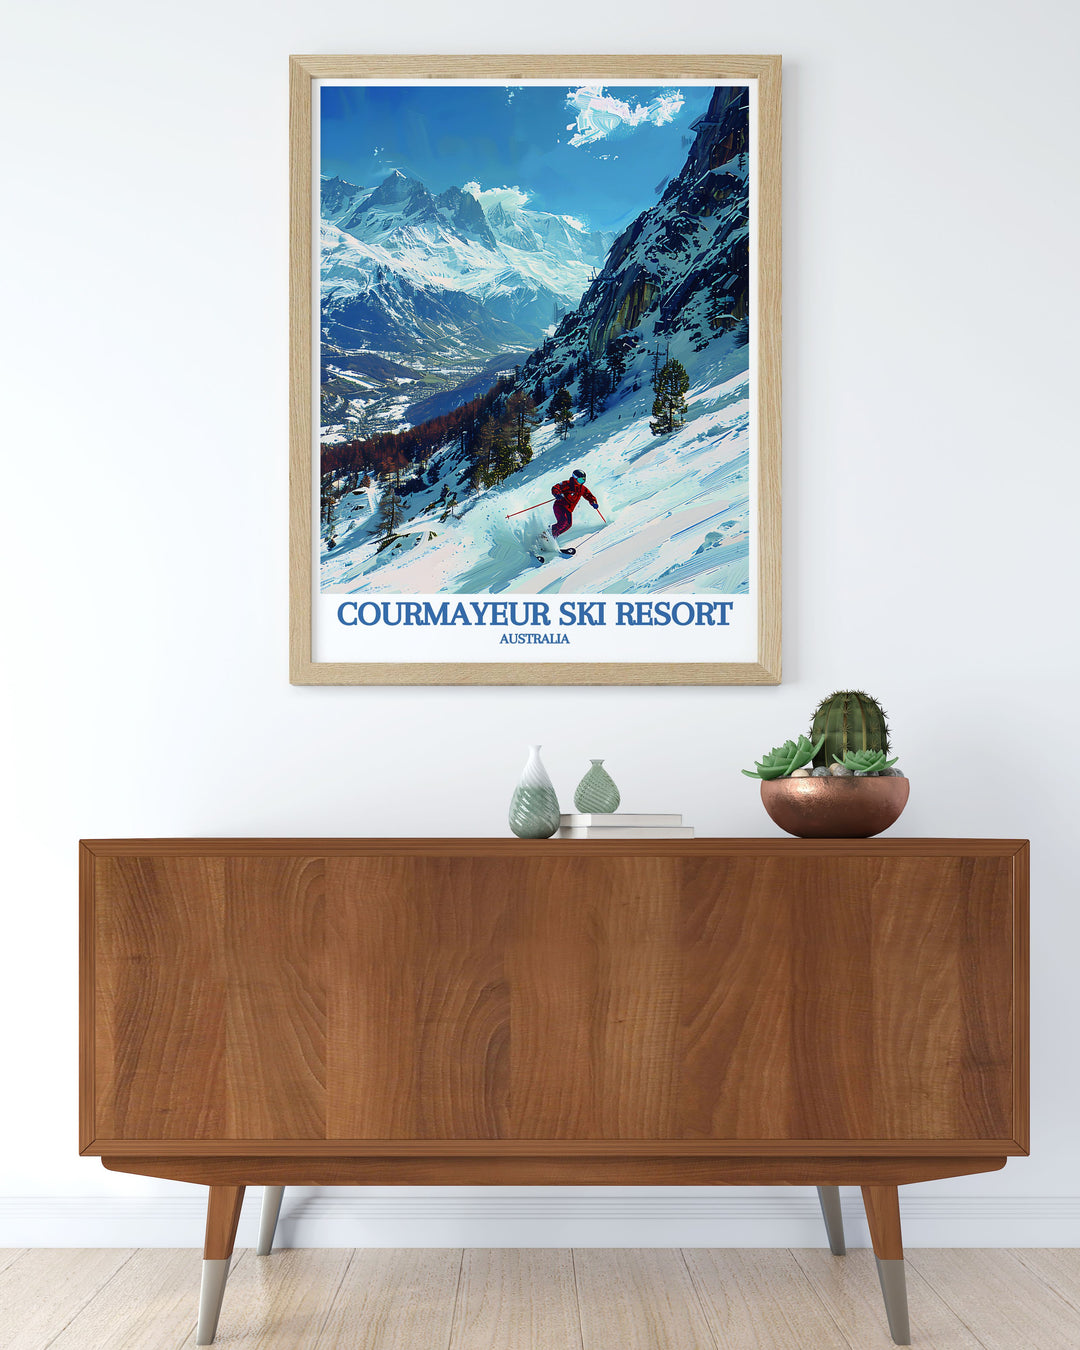 Featuring breathtaking vistas of Courmayeur Ski Resort and the majestic Mont Blanc, this poster is perfect for those who wish to bring a piece of Italys natural splendor and ski resort luxury into their home.